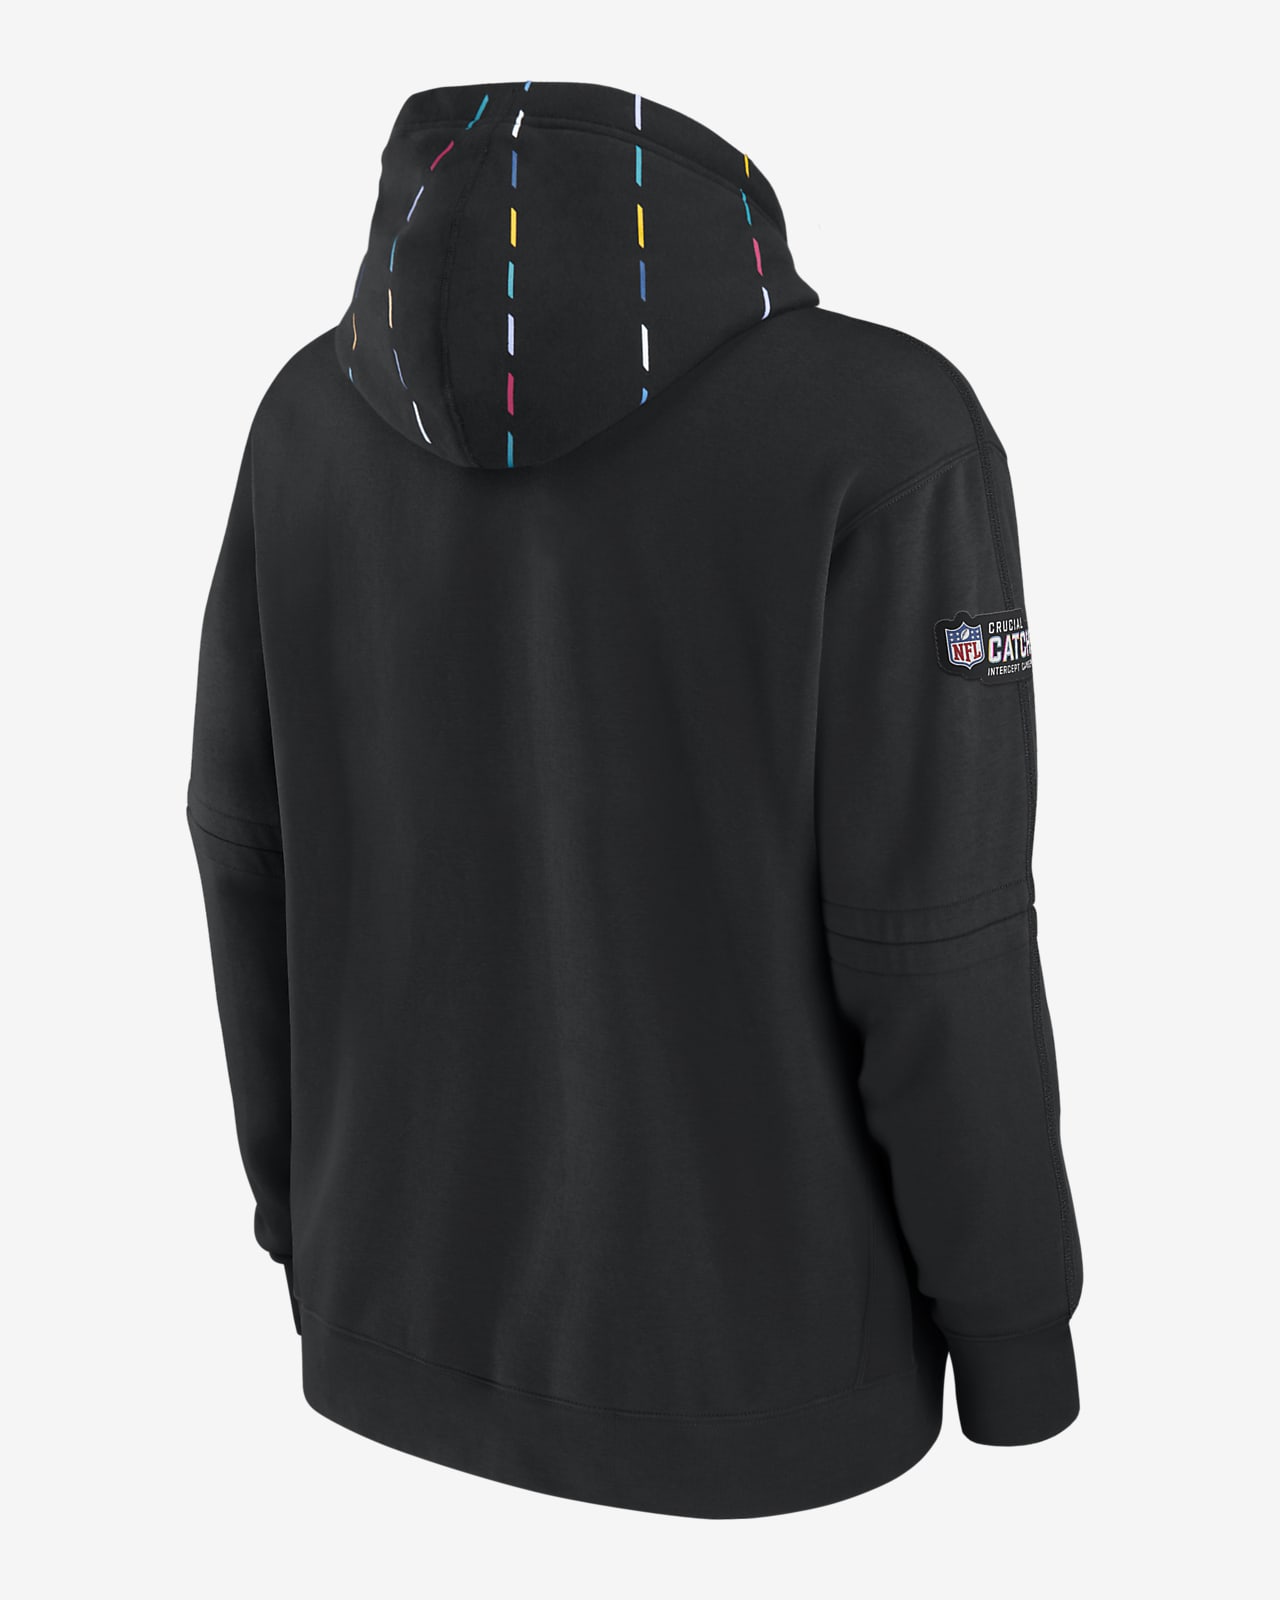 NEW Authentic Nike Green Bay Packers Men's NFL Crucial Catch Hoodie - Black